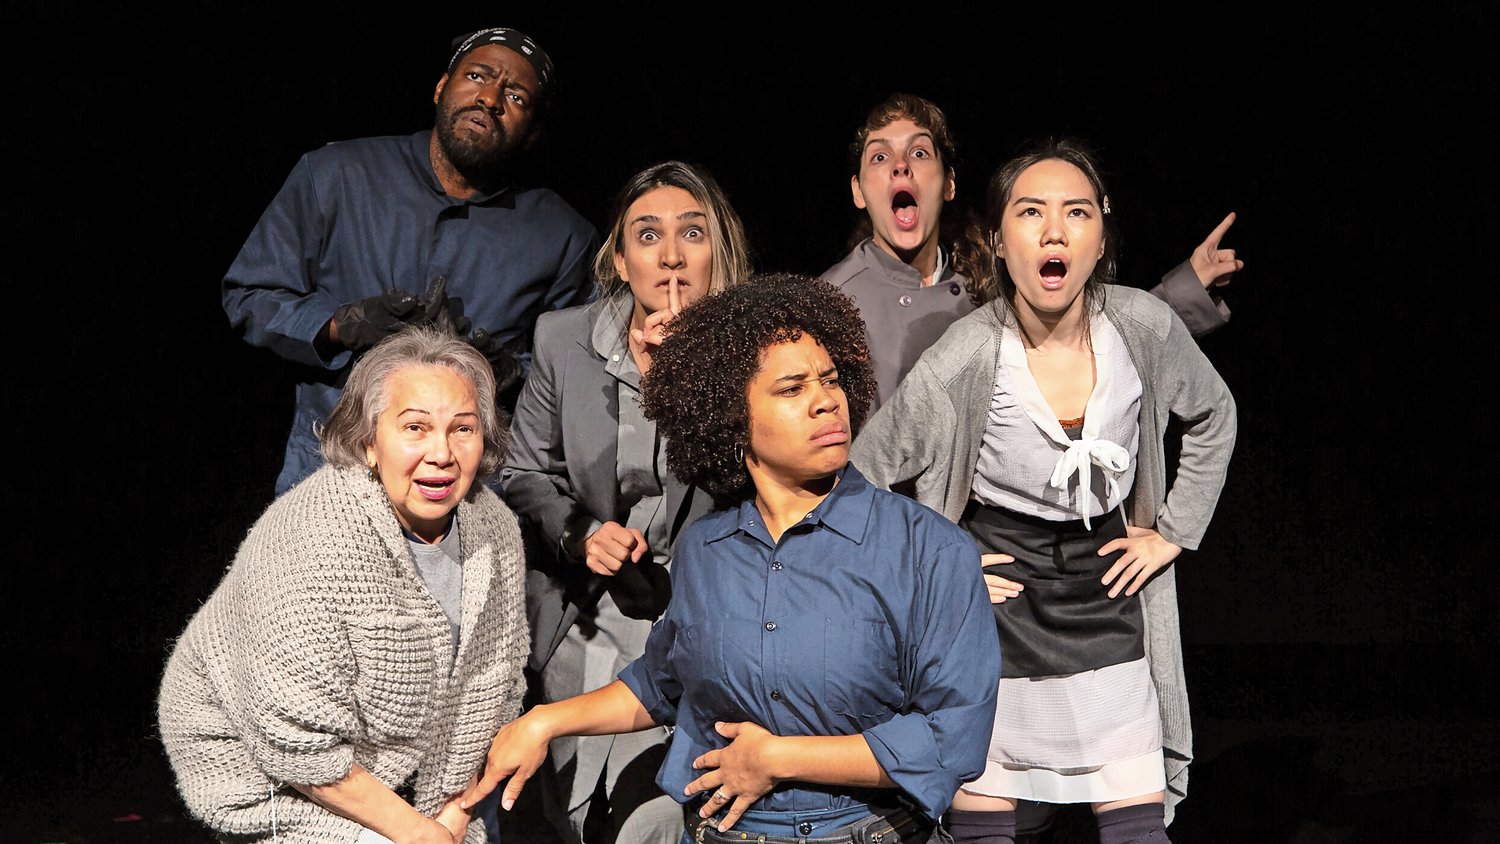 A cast from the People’s Theatre Project put on ‘Somos Más,’ in which six immigrants unite to take on a dystopian nation. A new Immigrant Research and Performing Arts Center located just across the Spuyten Duyvil Creek in Inwood, is expected to play host to a number of community events centered around the immigrant experience.